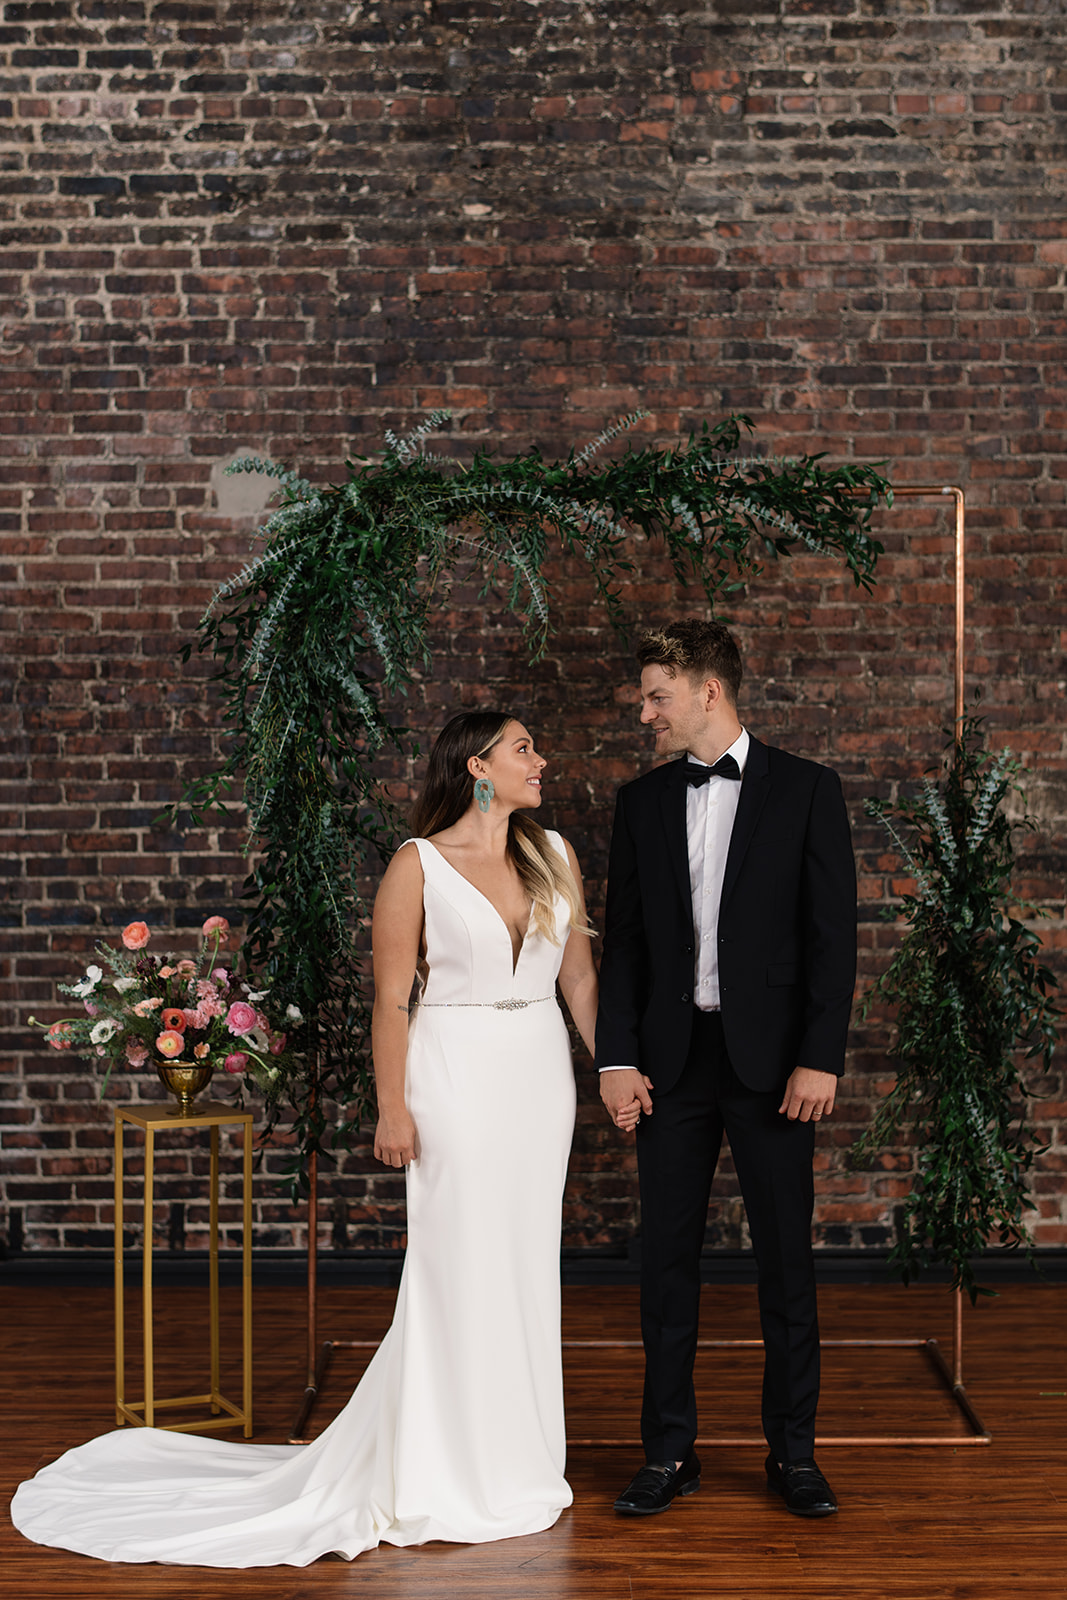 couple under copper wedding altar brick wall olympic south side theater wedding venue